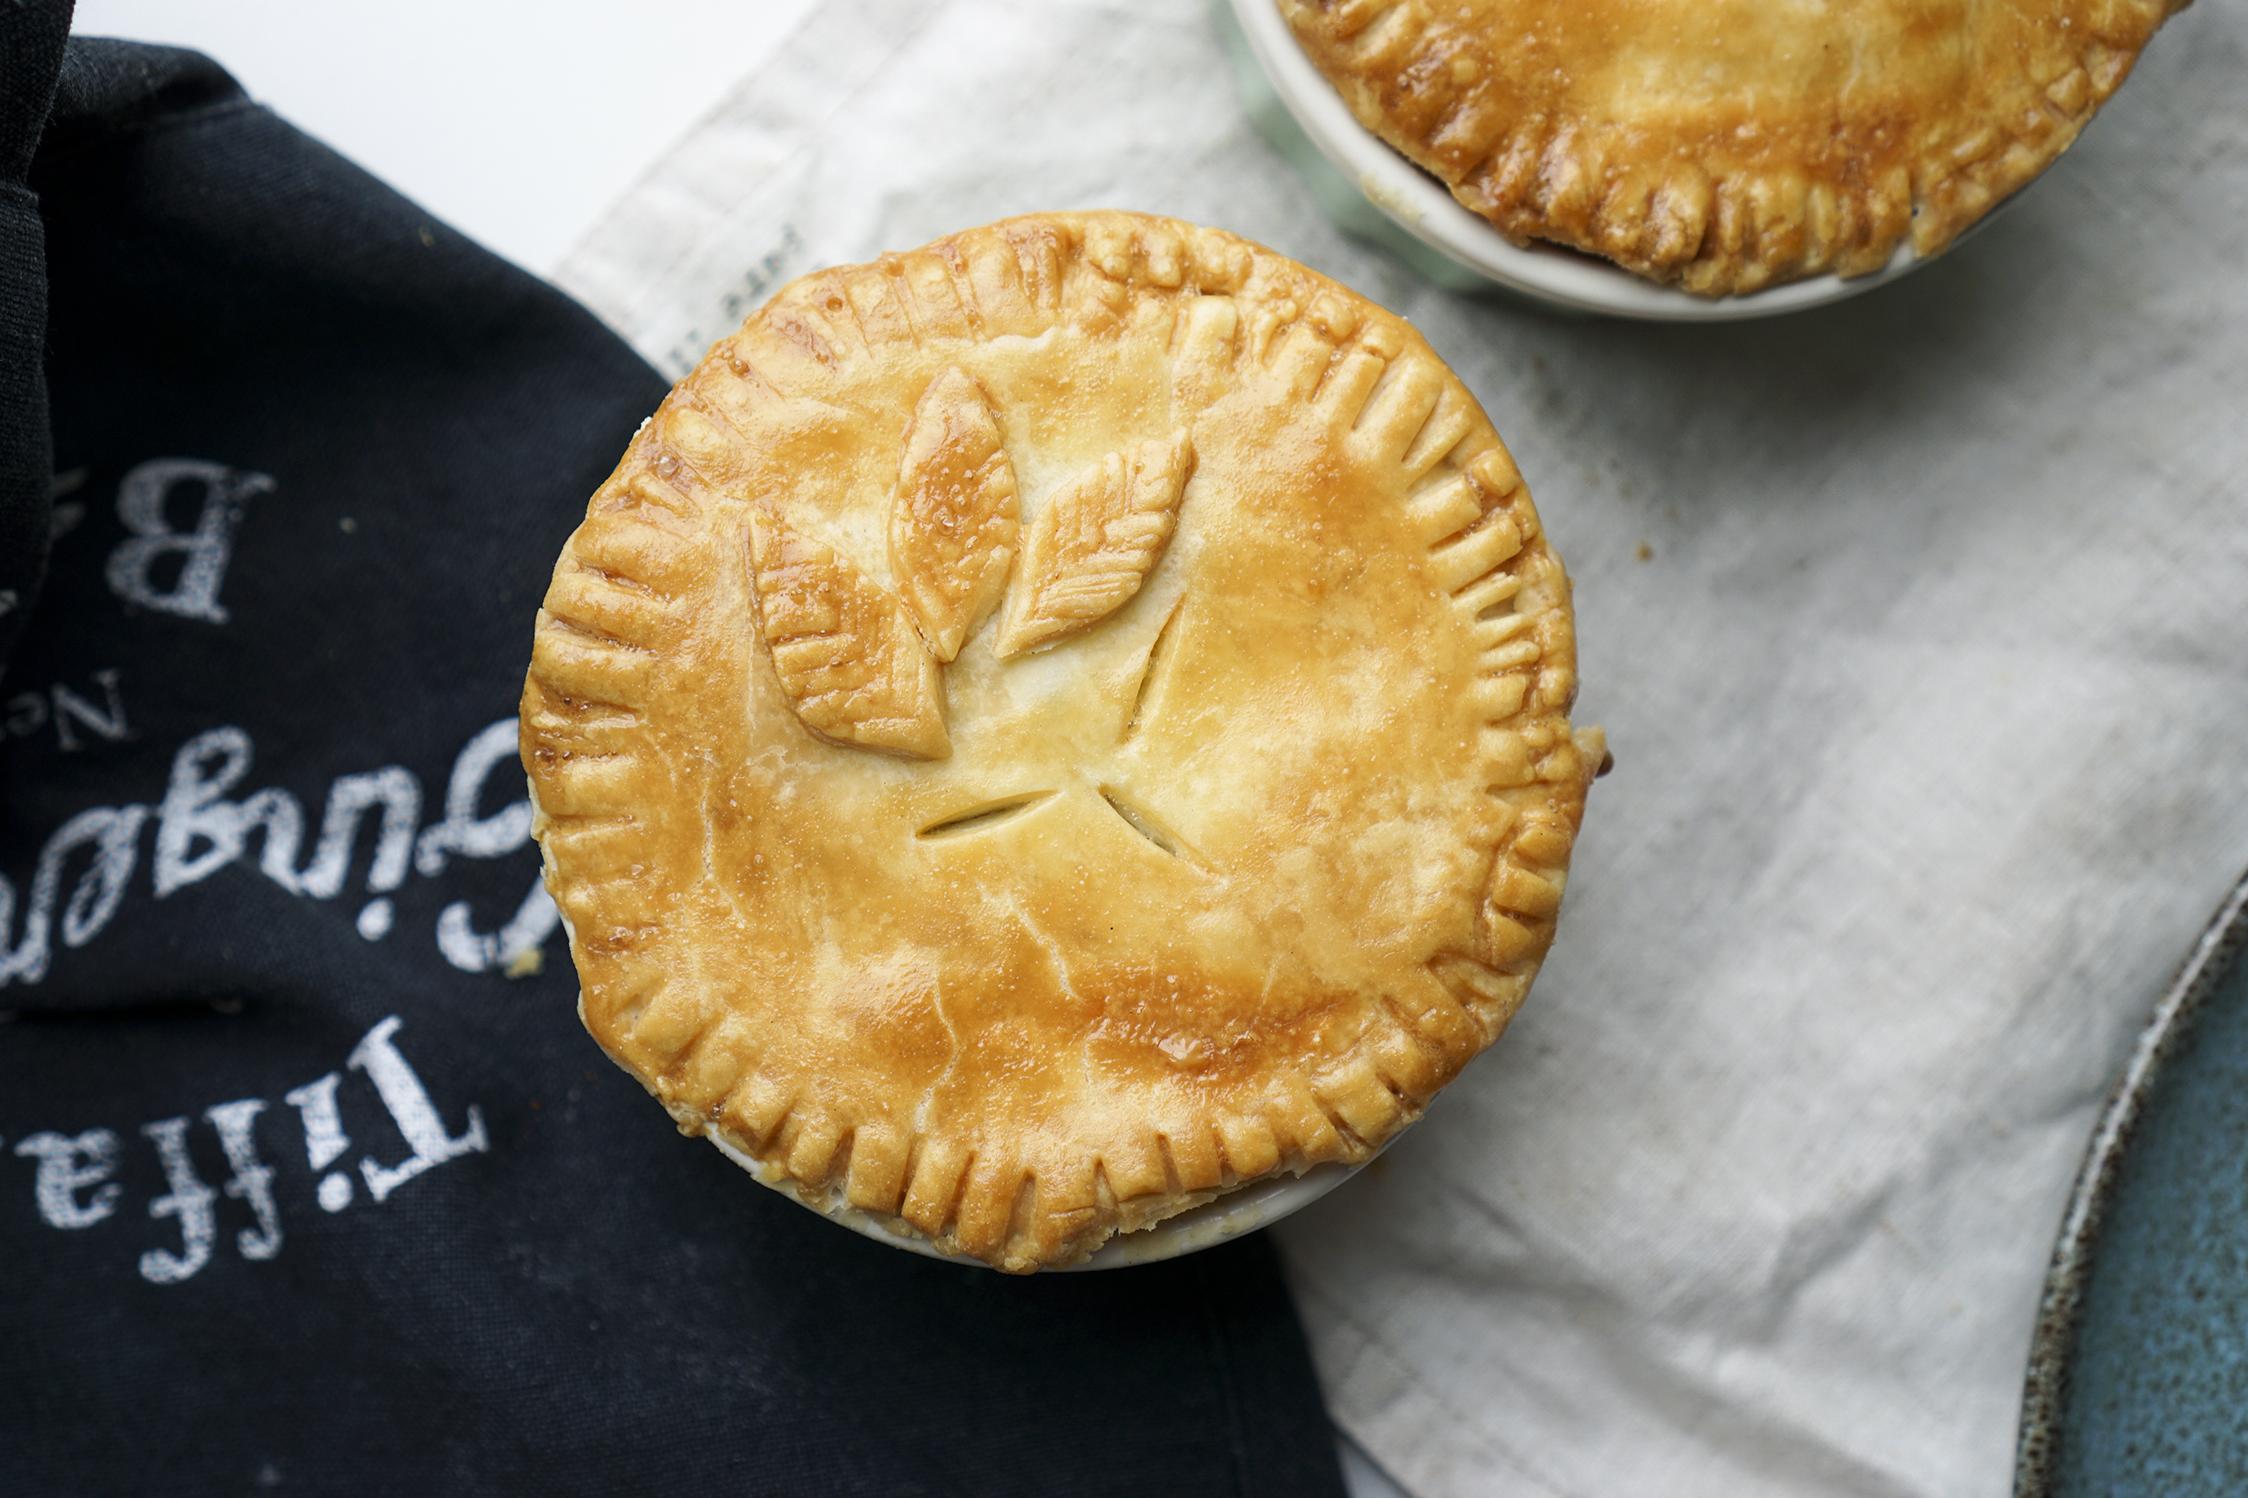  Satisfy your savoury cravings with this delicious shortcrust pastry.